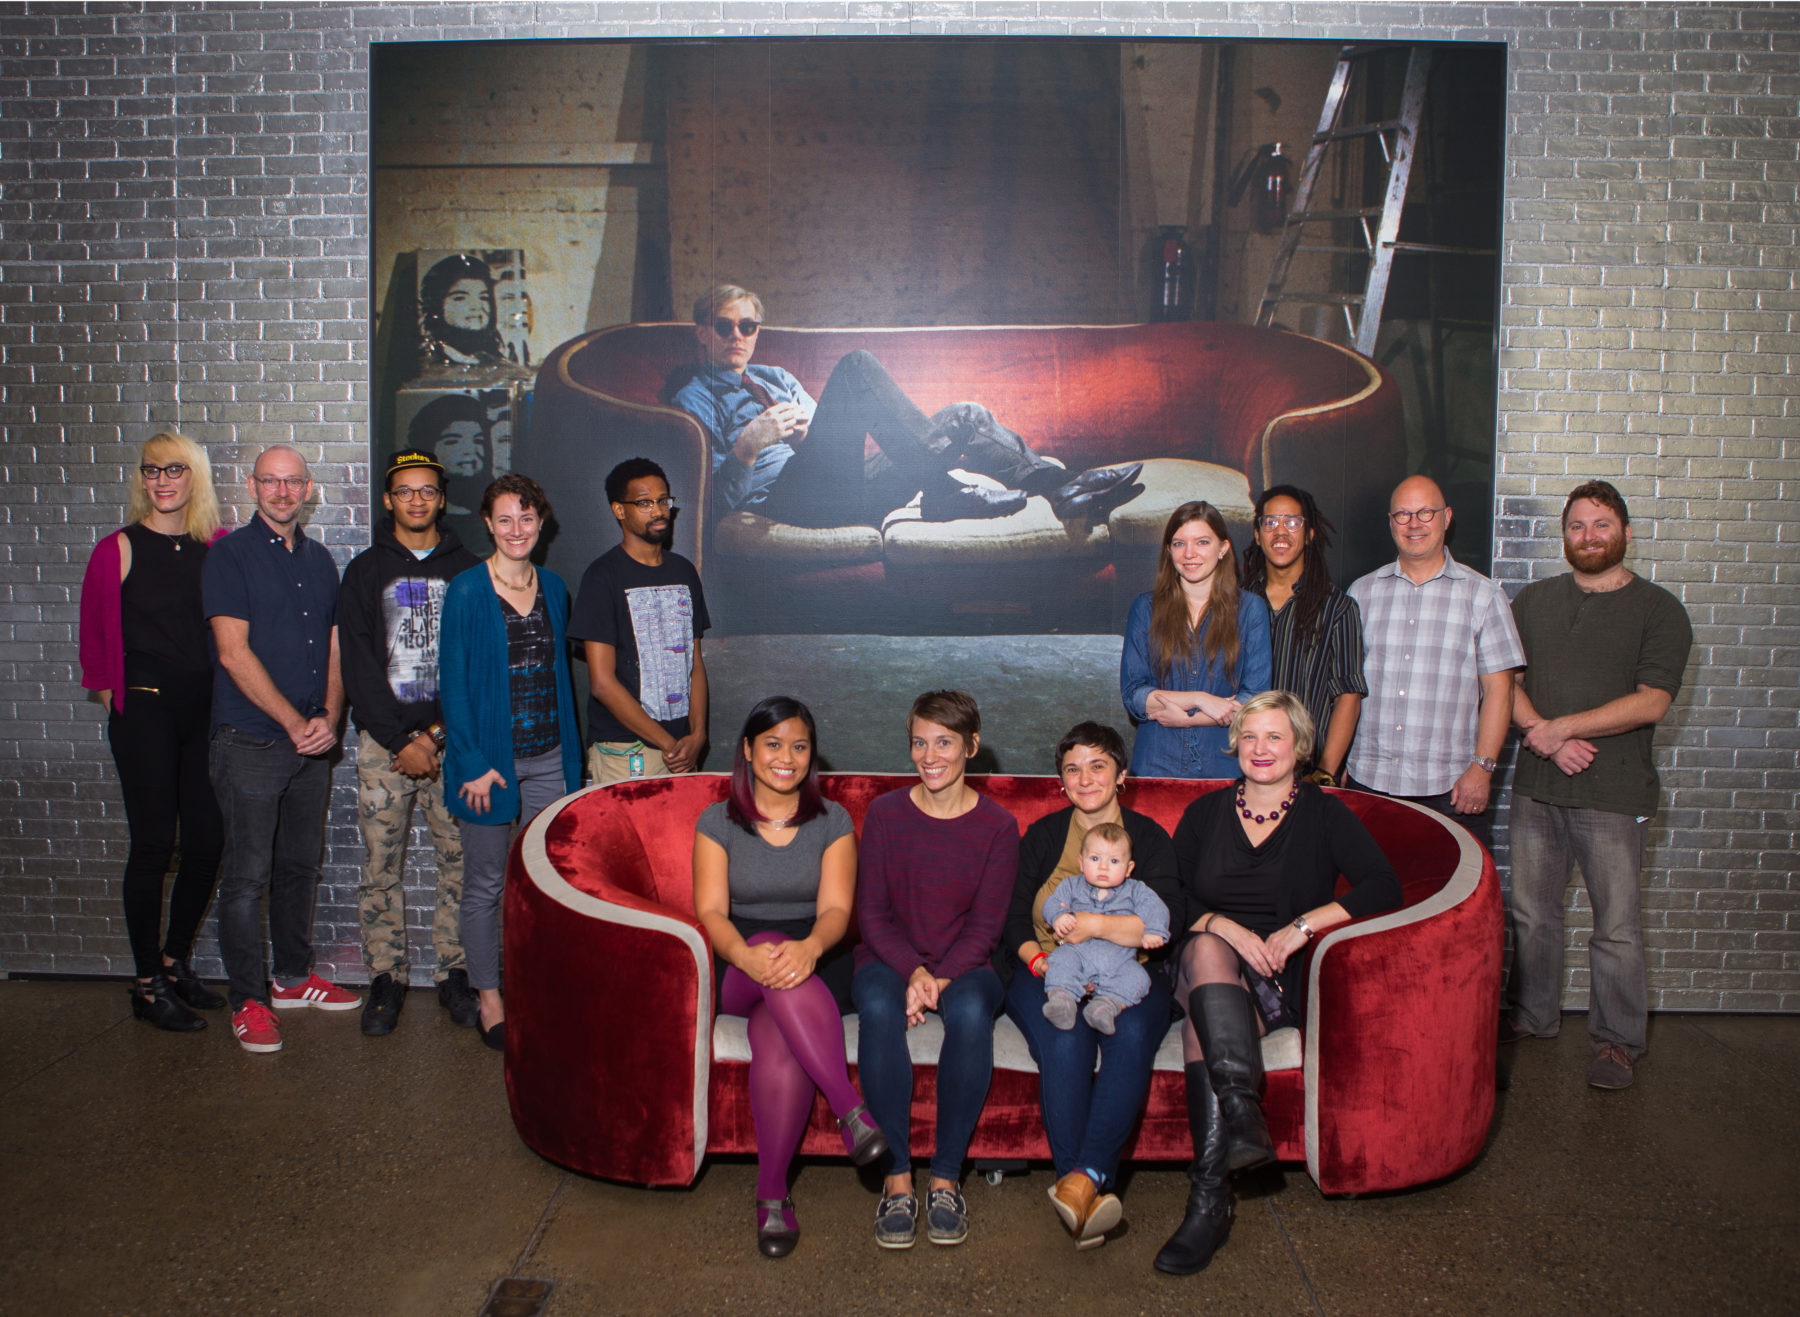 A group of staff members pose for a photo on and around a red couch. On the wall behind the couch is a photo of Andy Warhol lounging on a similar couch. One of the people on the couch is holding an infant.